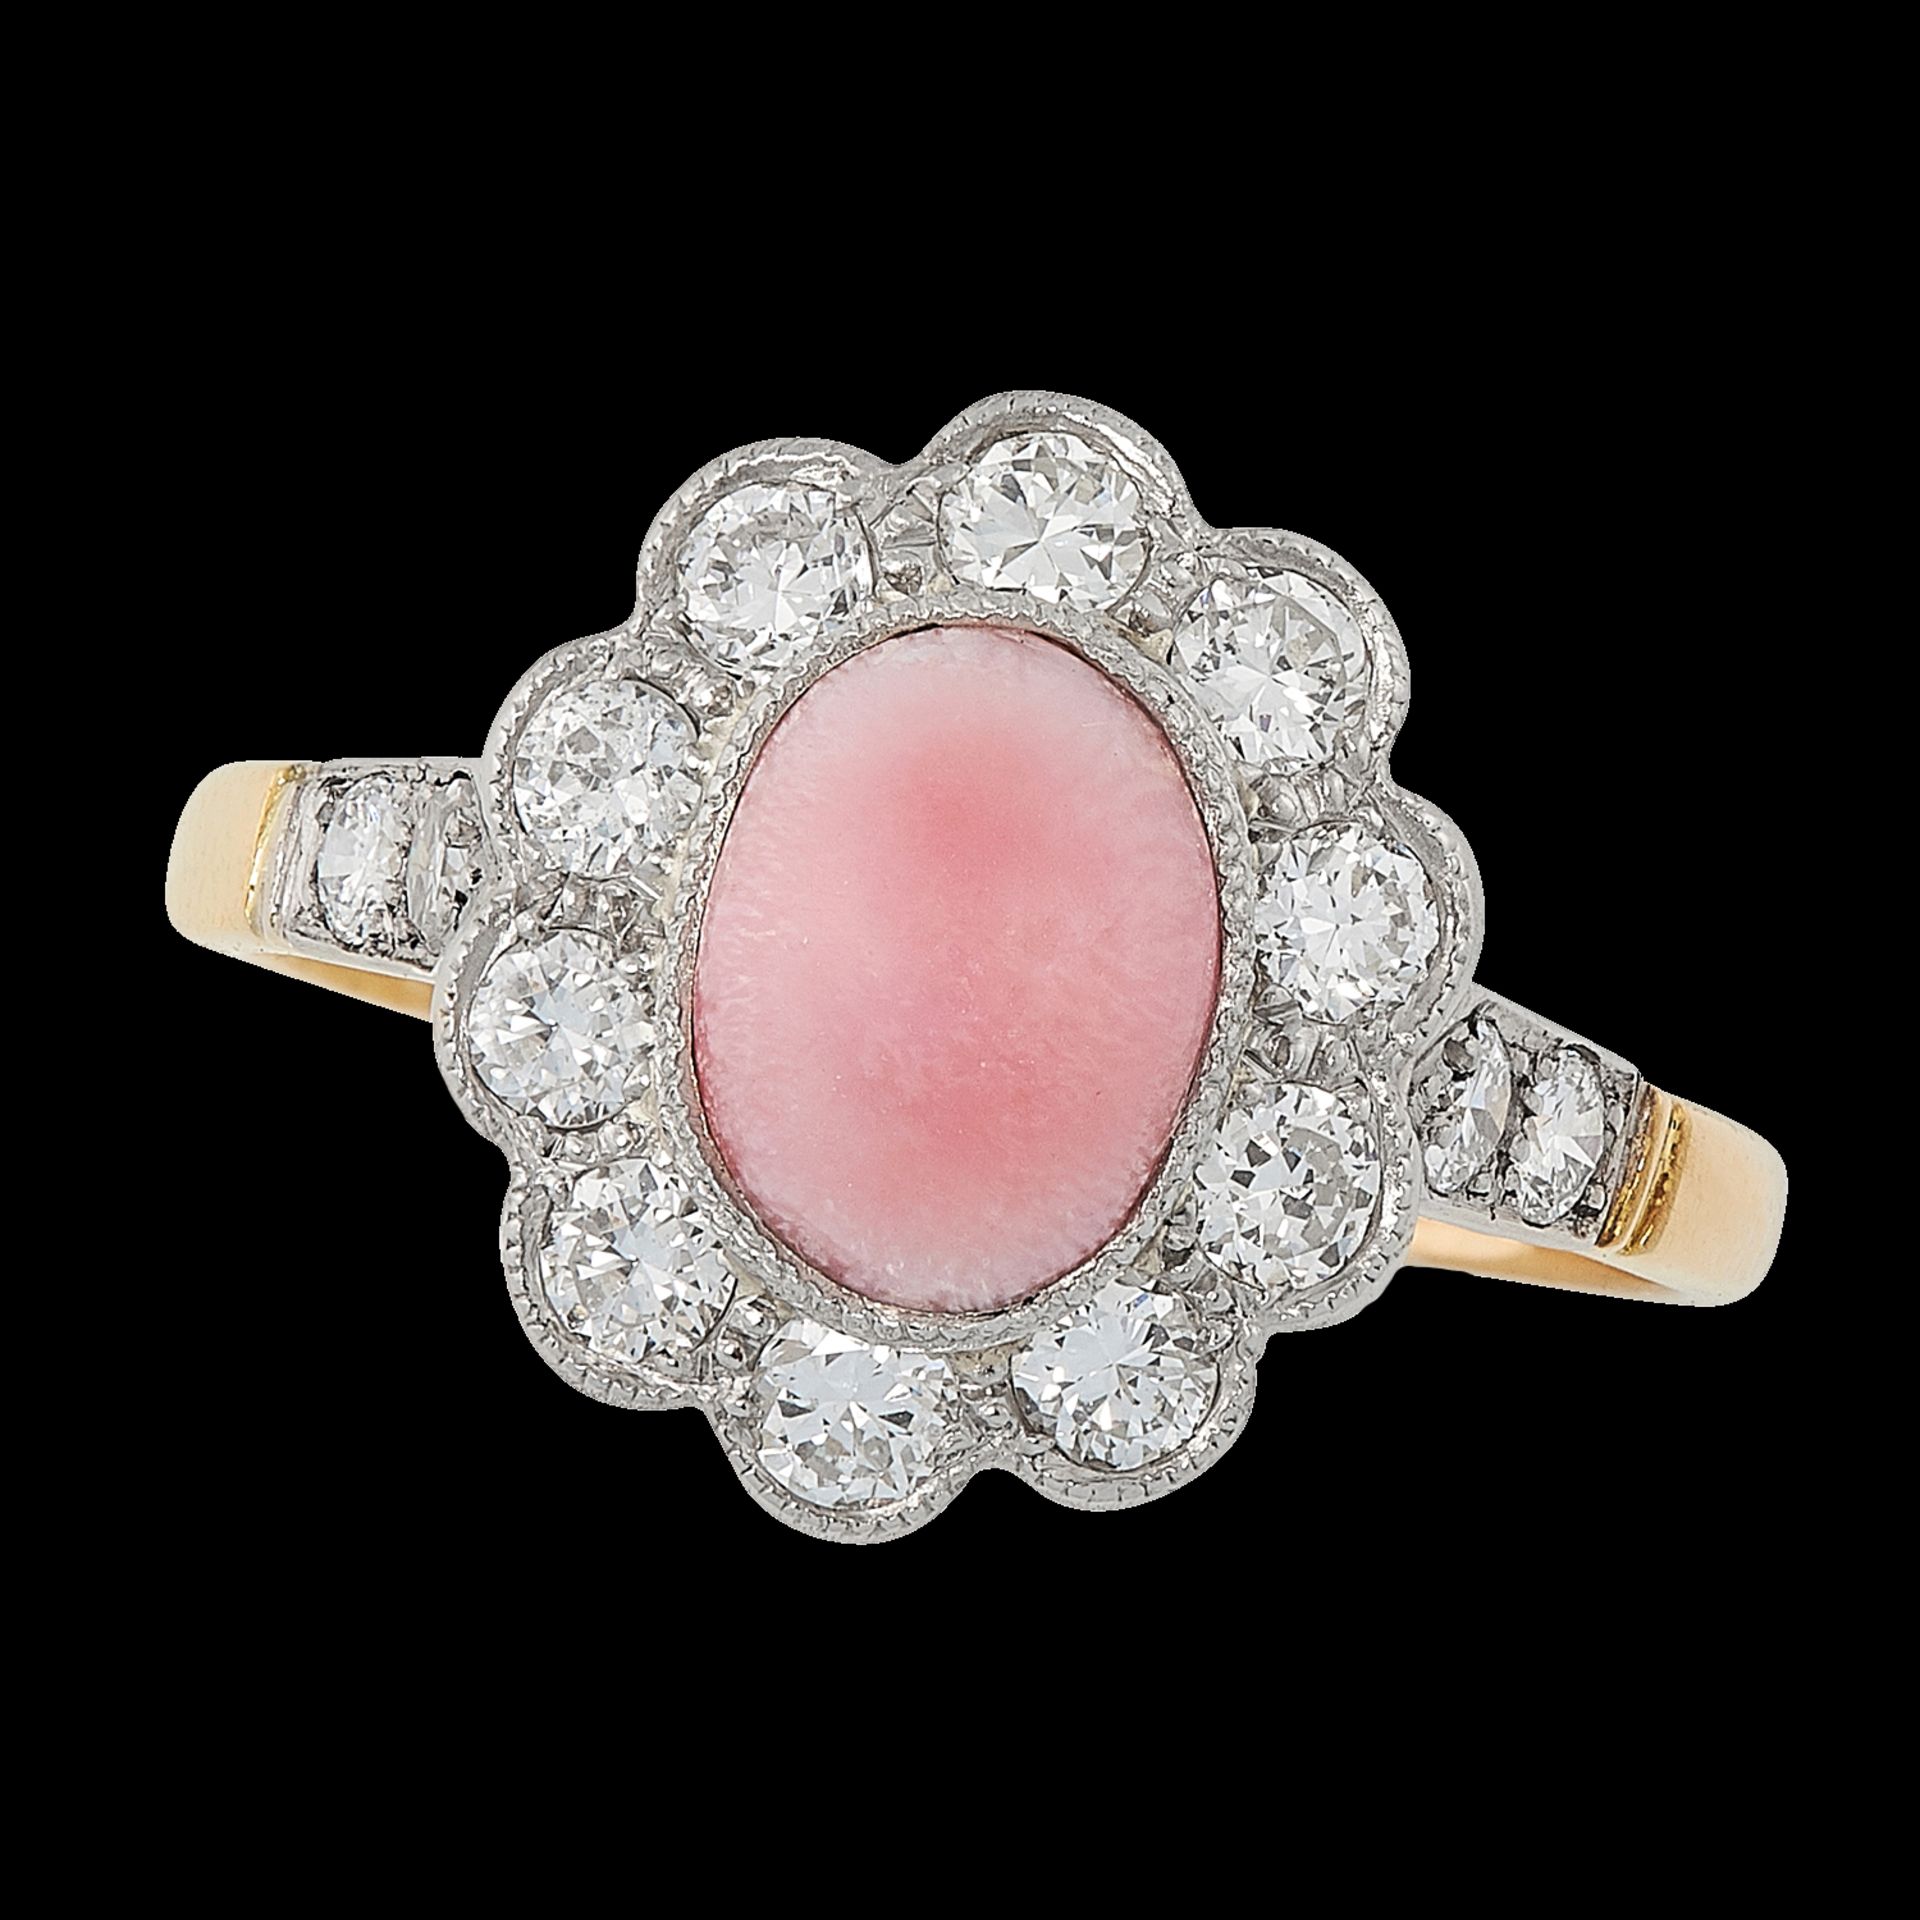 CONCH PEARL AND DIAMOND CLUSTER RING